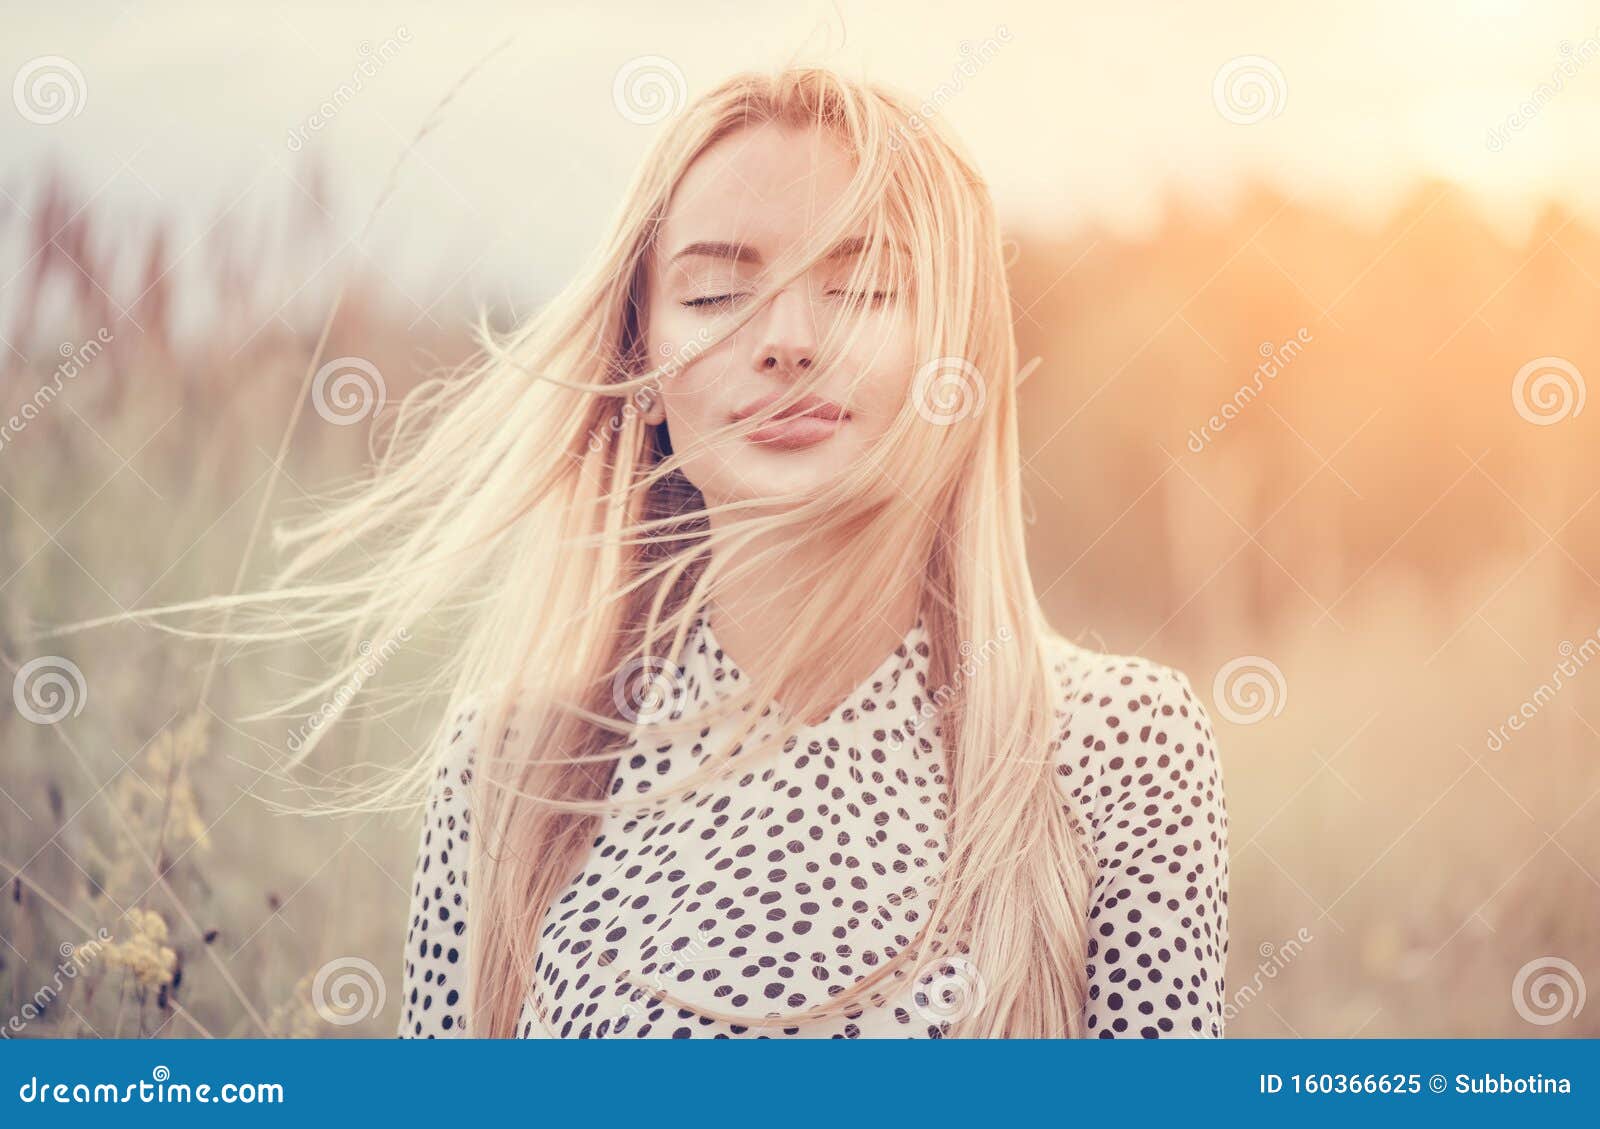 close up portrait of beauty girl with fluttering white hair enjoying nature outdoors, on a field. flying blonde hair on the wind